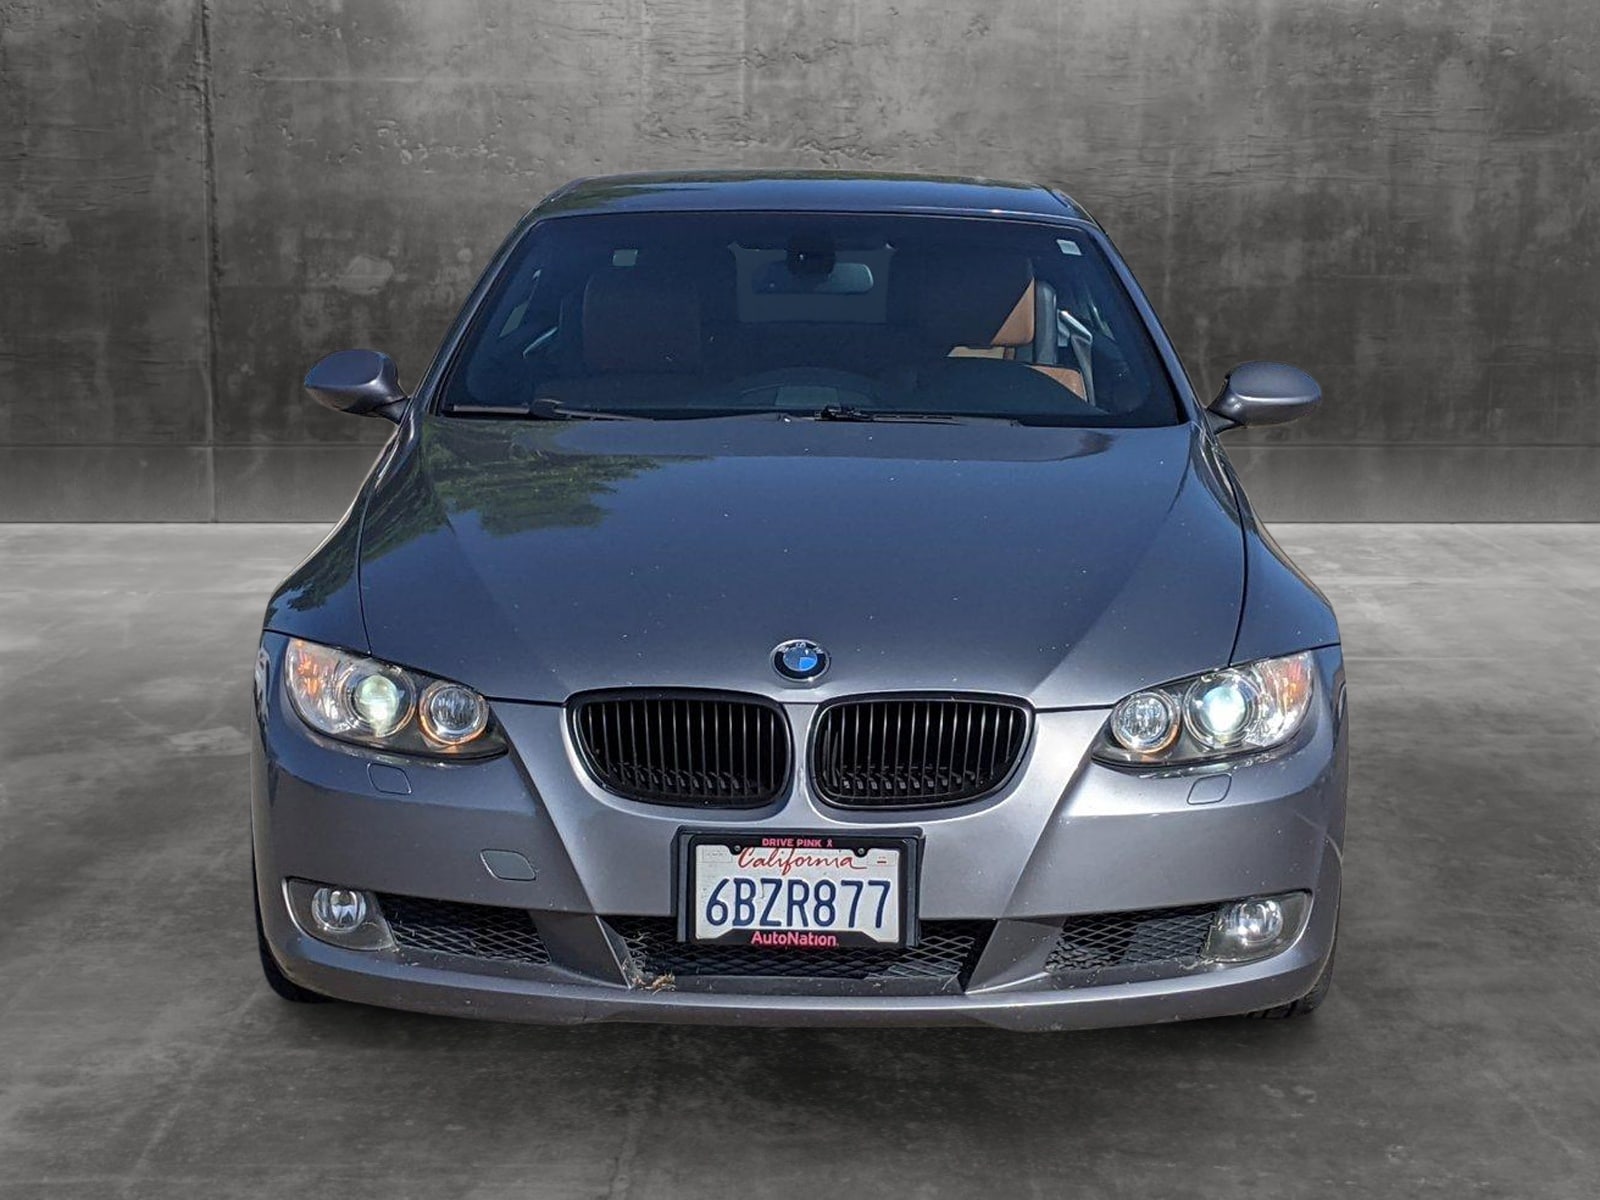 Used 2008 BMW 328i For Sale at AutoNation Toyota Hayward | VIN